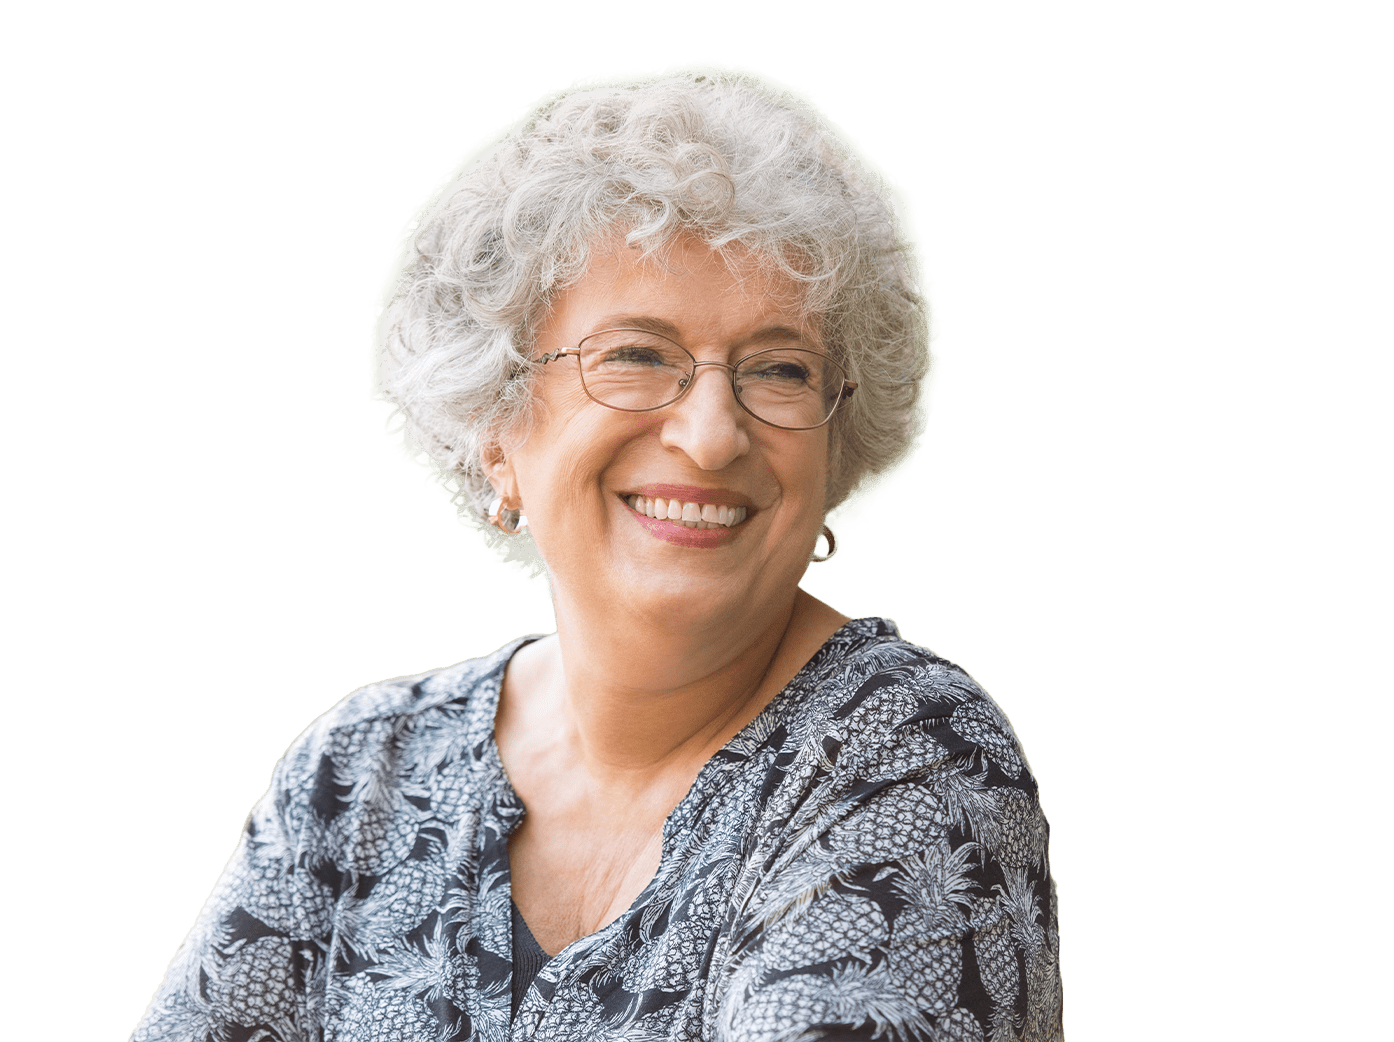 senior woman with grey hair smiling wearing glasses 